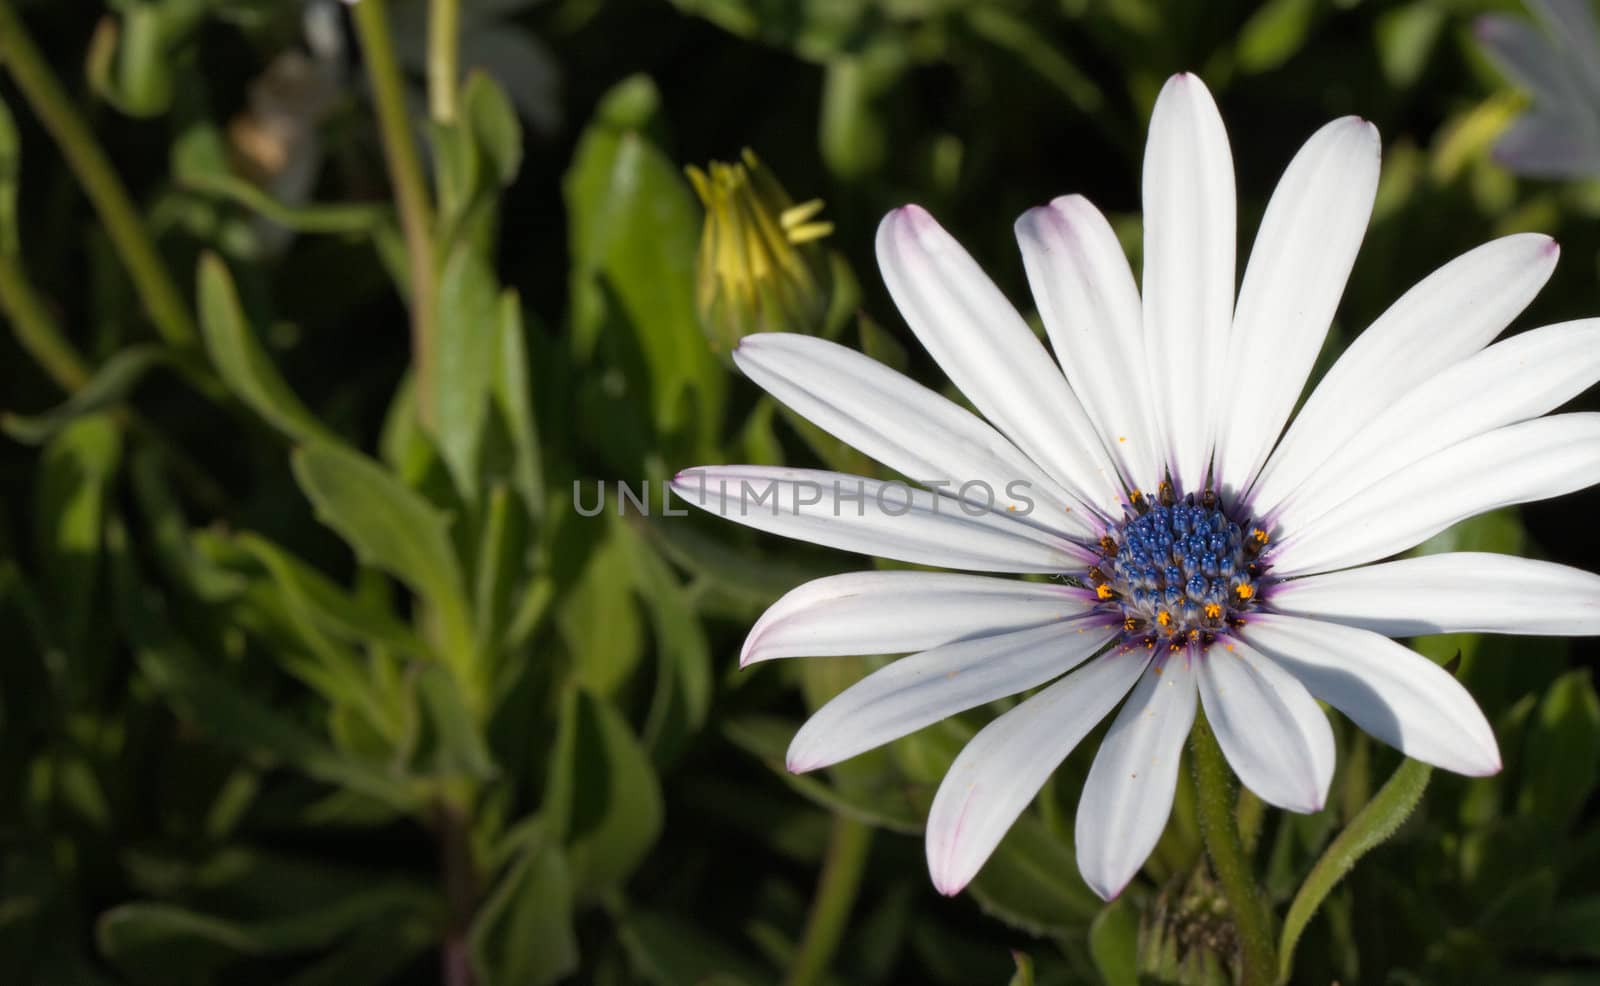 Soprano White Daisy with blue stamen against soft focus green plants